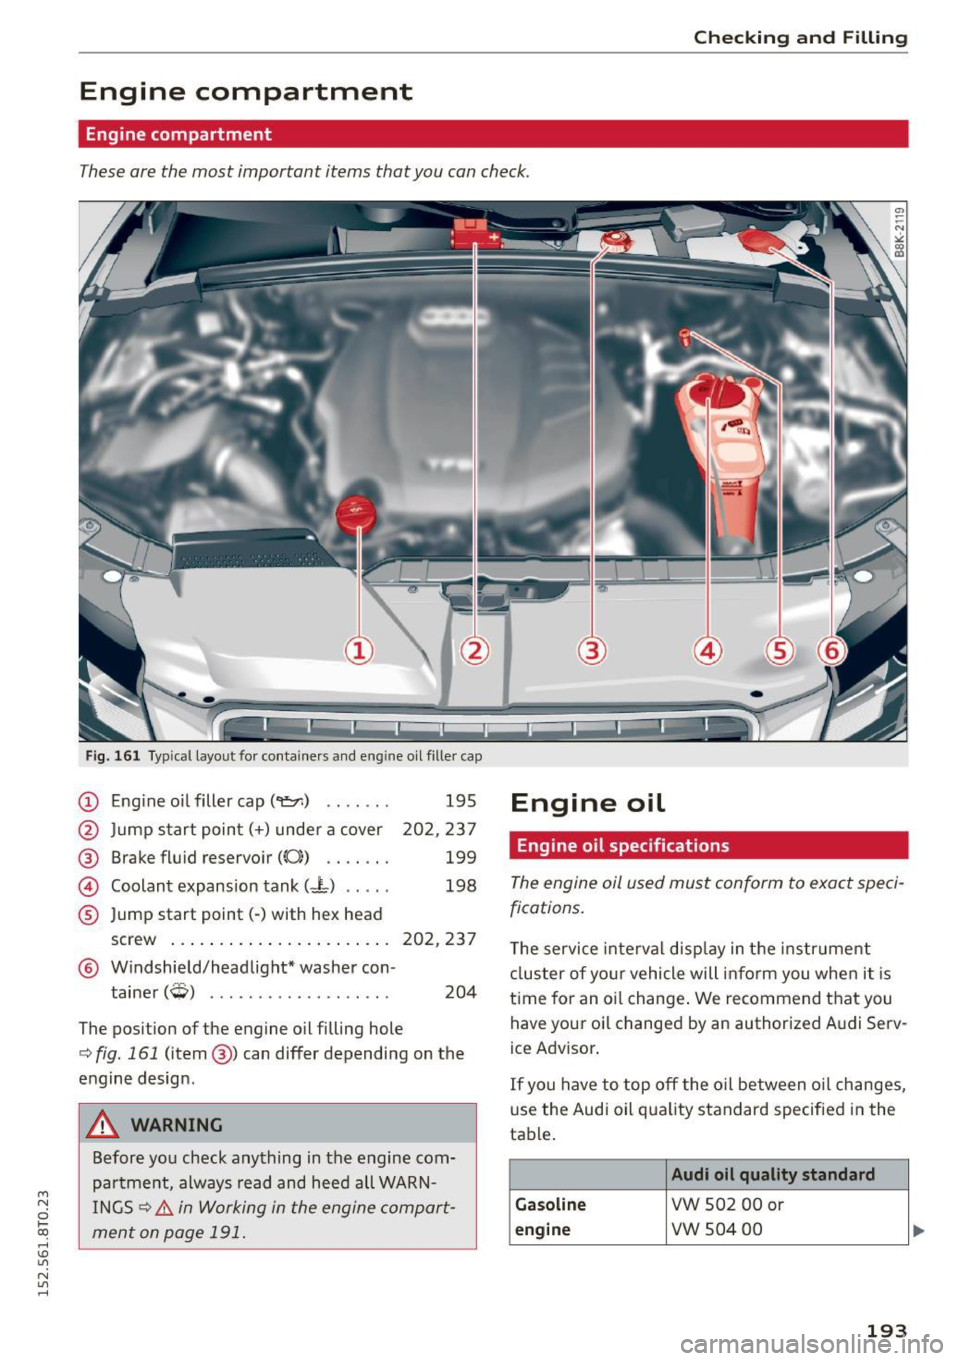 AUDI A5 2015  Owner´s Manual M N 
0 l­oo 
rl I.O 
" N 
" rl 
Checking and Filling 
Engine  compartment 
Engine  compartment 
These are the  most  important  items  that you  can check. 
Fig. 161 Typical  layout  for  container